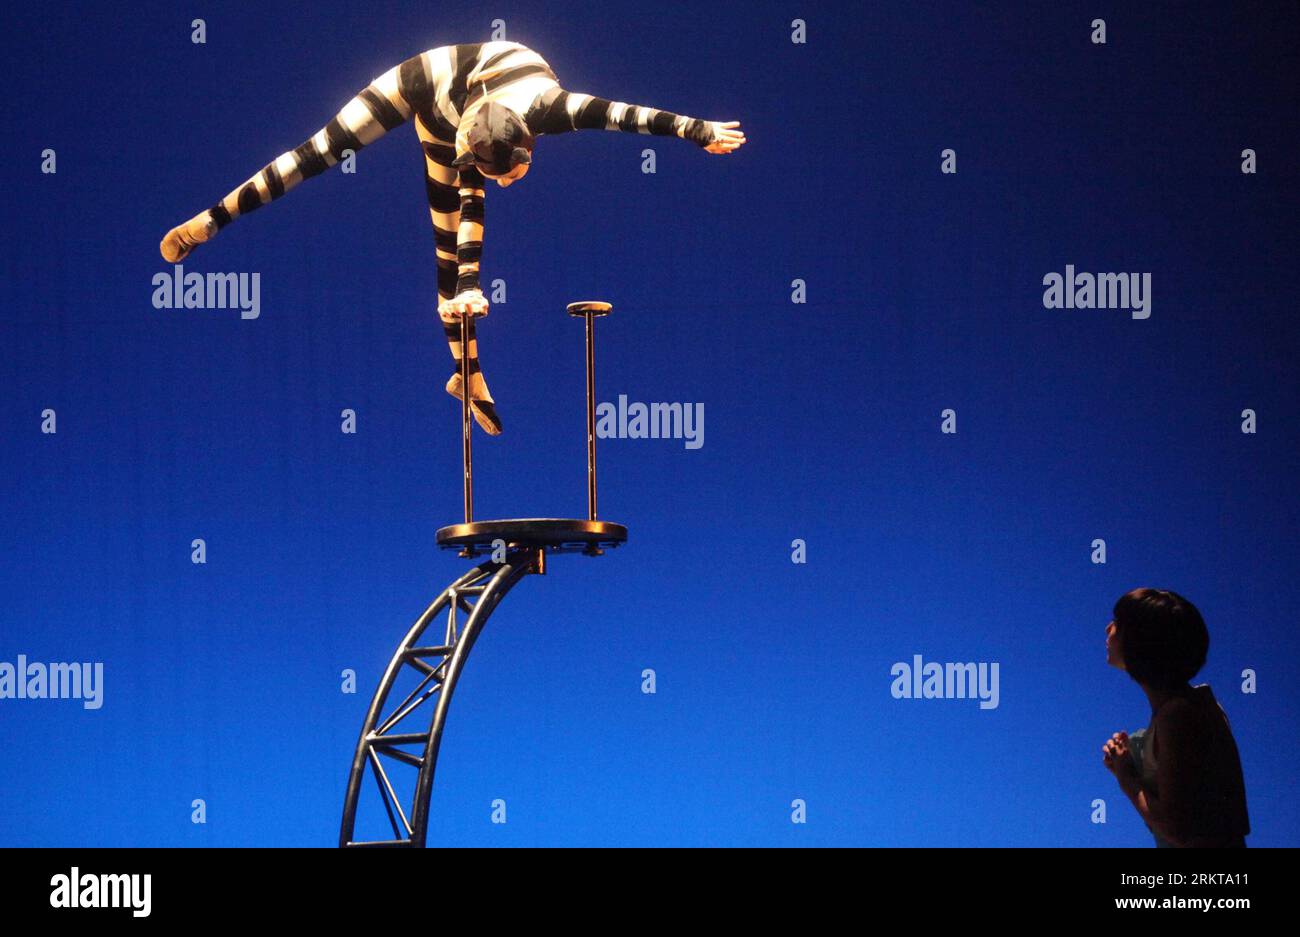 Bildnummer: 58417428  Datum: 01.09.2012  Copyright: imago/Xinhua TIANJIN, Sept. 1, 2012 - Acrobats perform in the premiere of the acrobatics show Alice s Adventures in Wonderland in north China s Tianjin, Sept. 1, 2012. The acrobatics show, co-created by Chinese and French artists, is adapted from the novel written by English author Charles Dodgson which tells a story of a girl named Alice who falls down a rabbit hole into a fantasy world populated by peculiar creatures. (Xinhua/Liu Dongyue) (mp) CHINA-TIANJIN-ACROBATICS-PREMIERE (CN) PUBLICATIONxNOTxINxCHN Gesellschaft Kultur Akrobatik Akroba Stock Photo